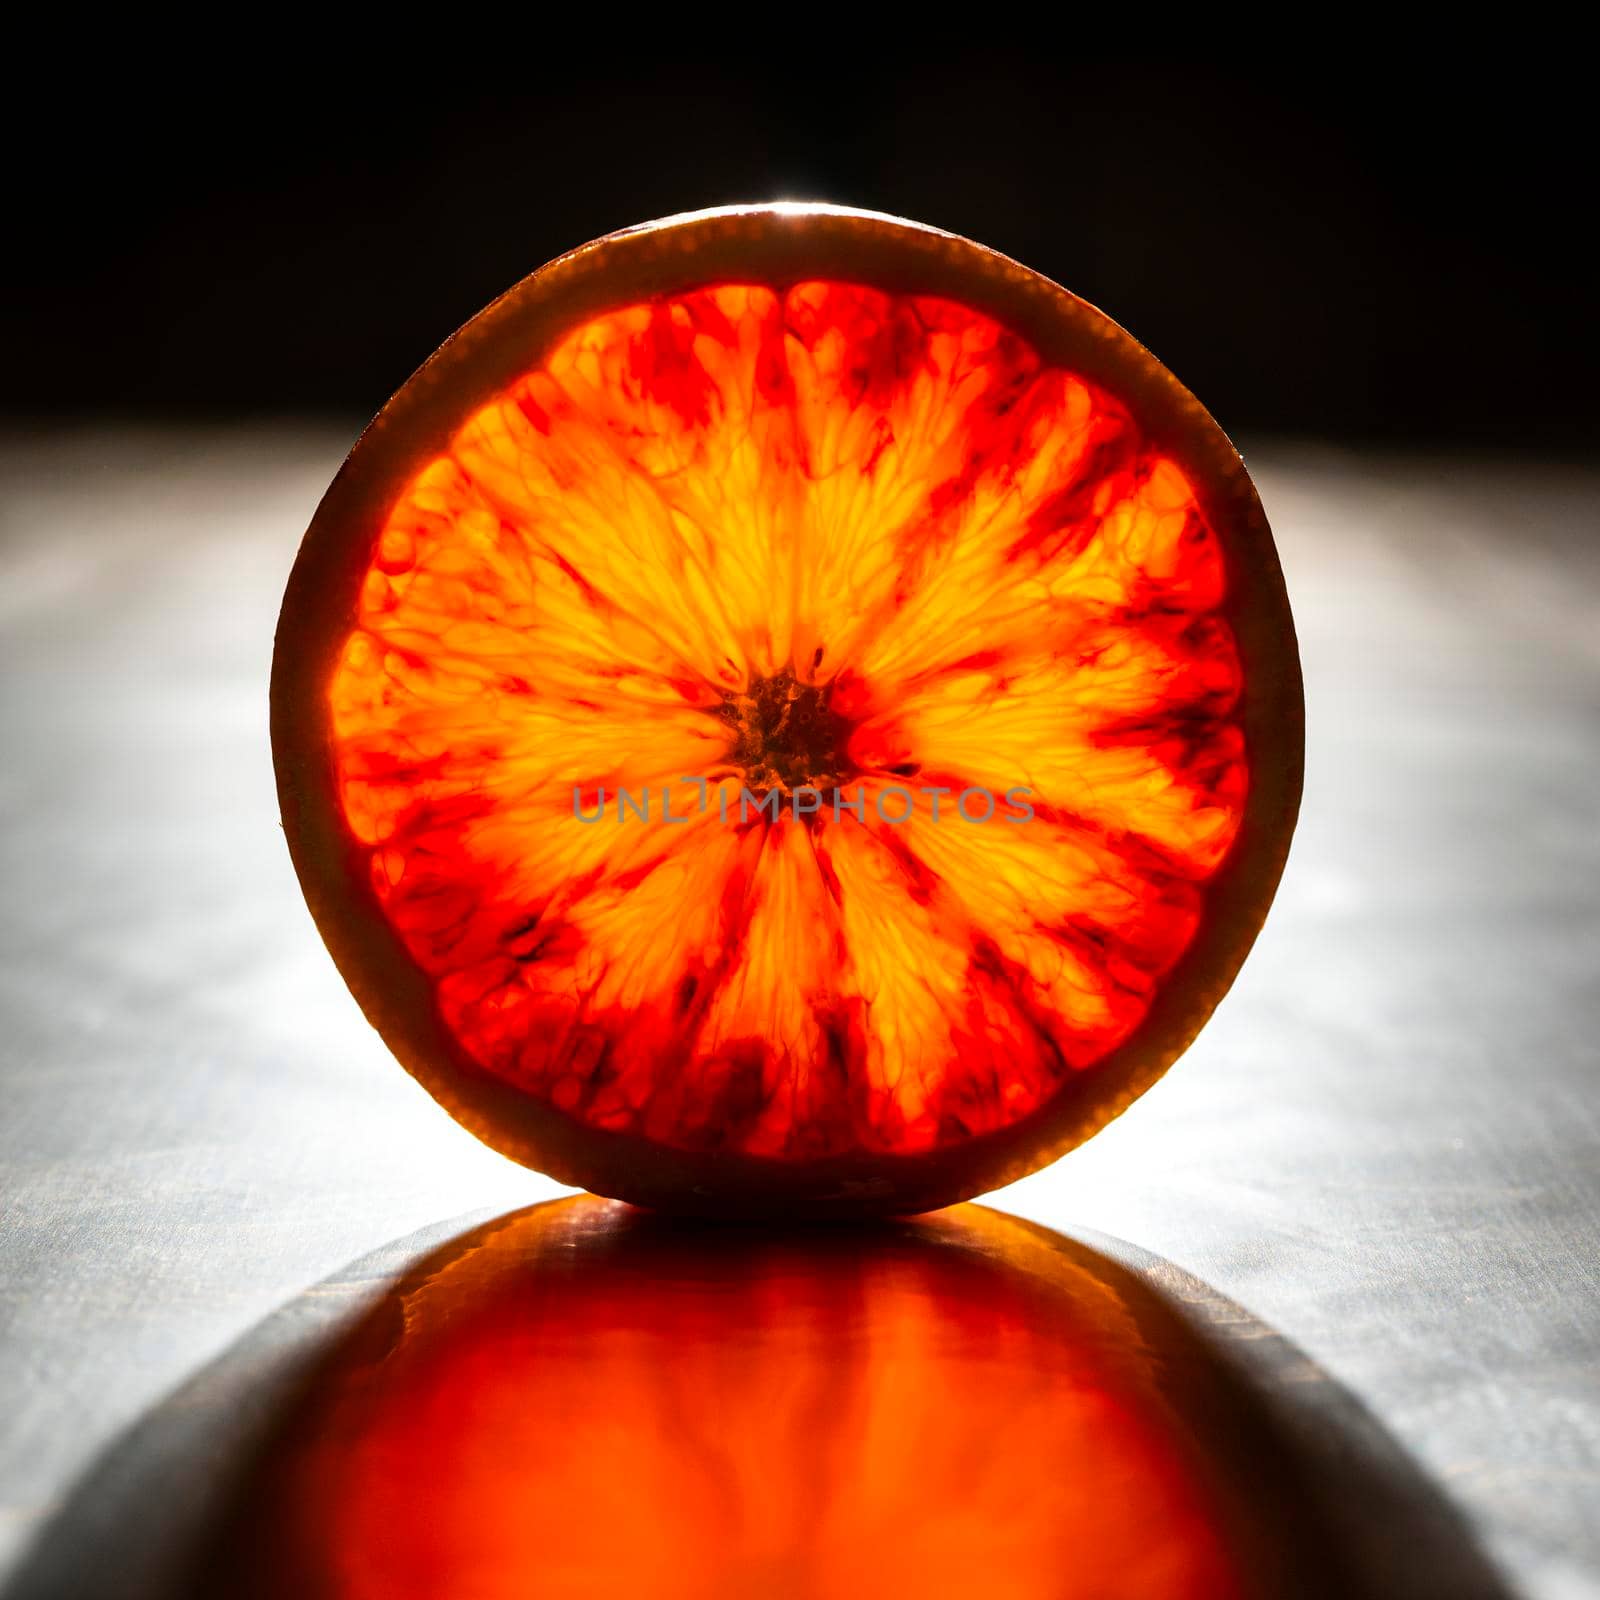 view of the transparent light of an orange slice